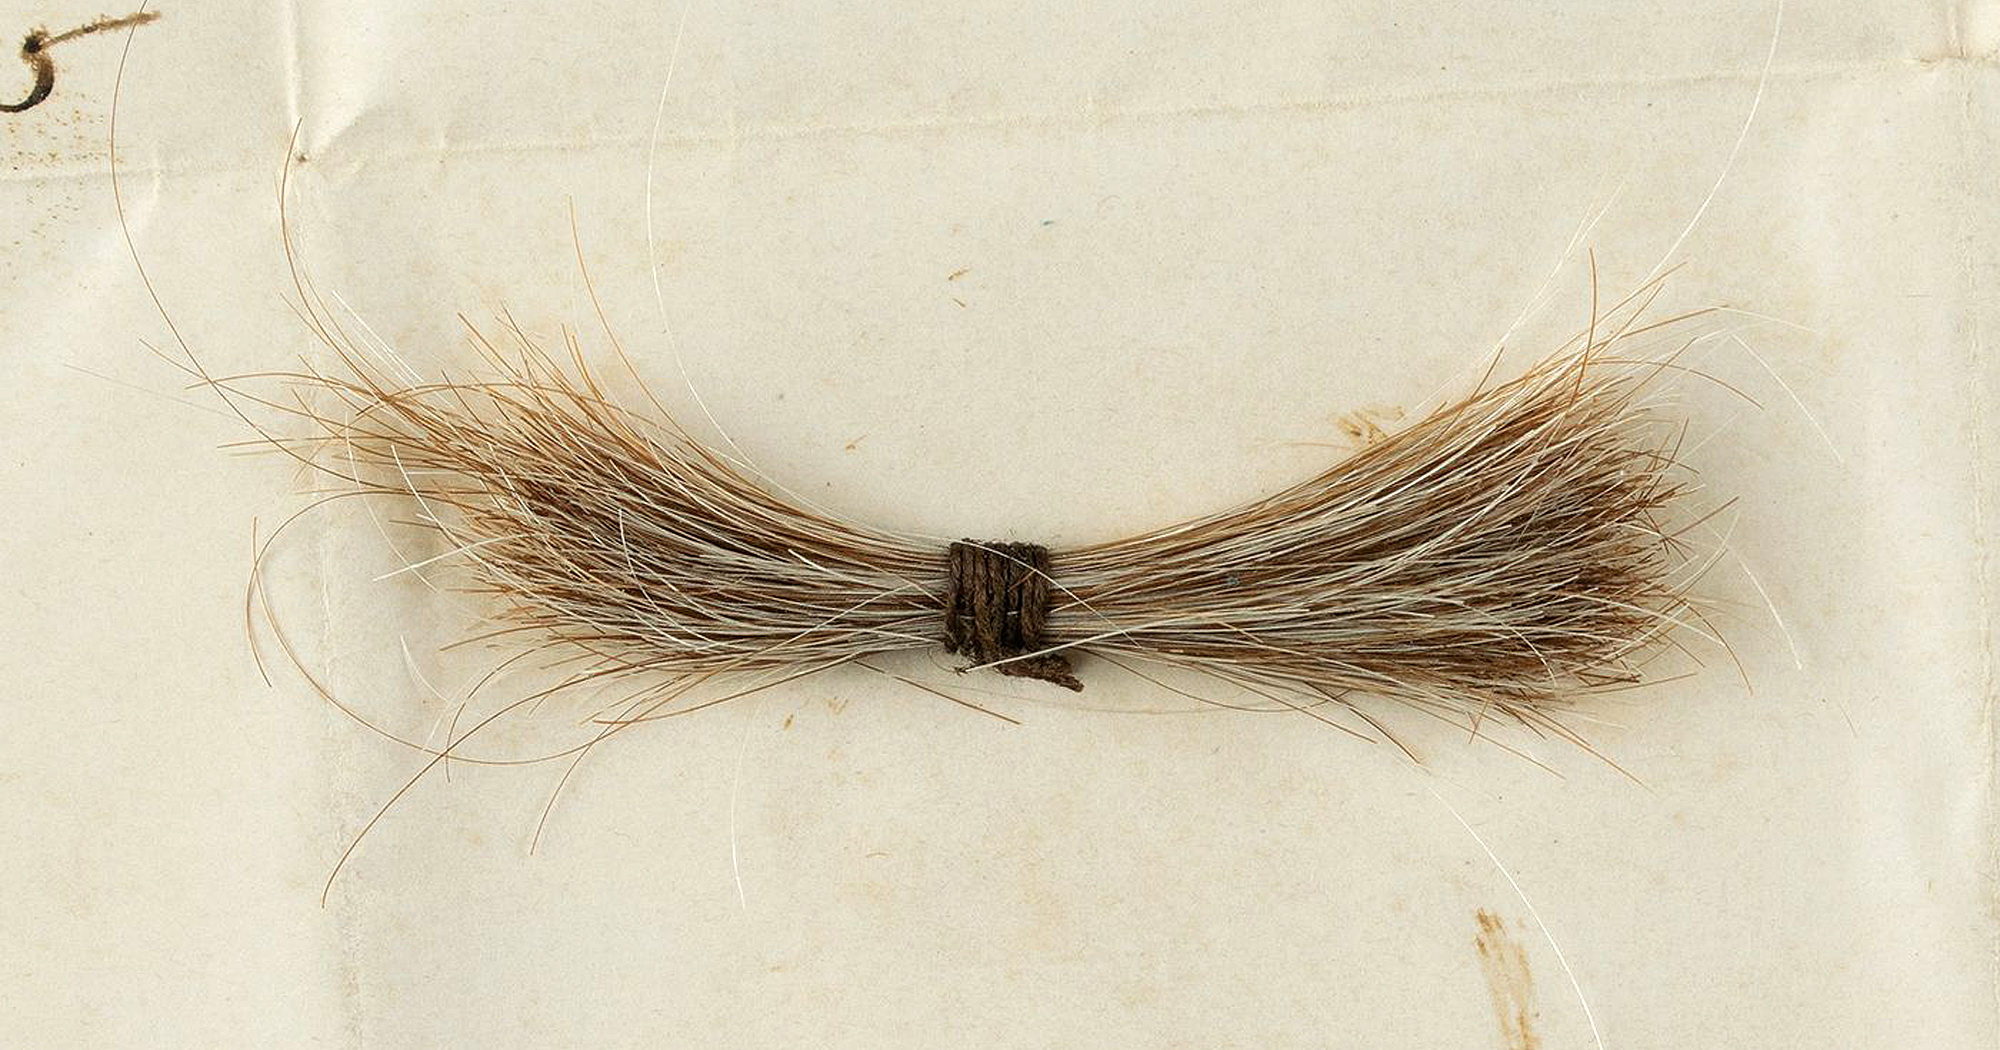 This July 2020 photo released by RR Auction shows a lock of President Abraham Lincoln's hair to be auctioned on Sept. 12, 2020, by the Boston-based auction firm. The lock of hair was removed during Lincoln's postmortem examination in April 1865 after he was fatally shot by John Wilkes Booth at Ford's Theatre in Washington, D.C.